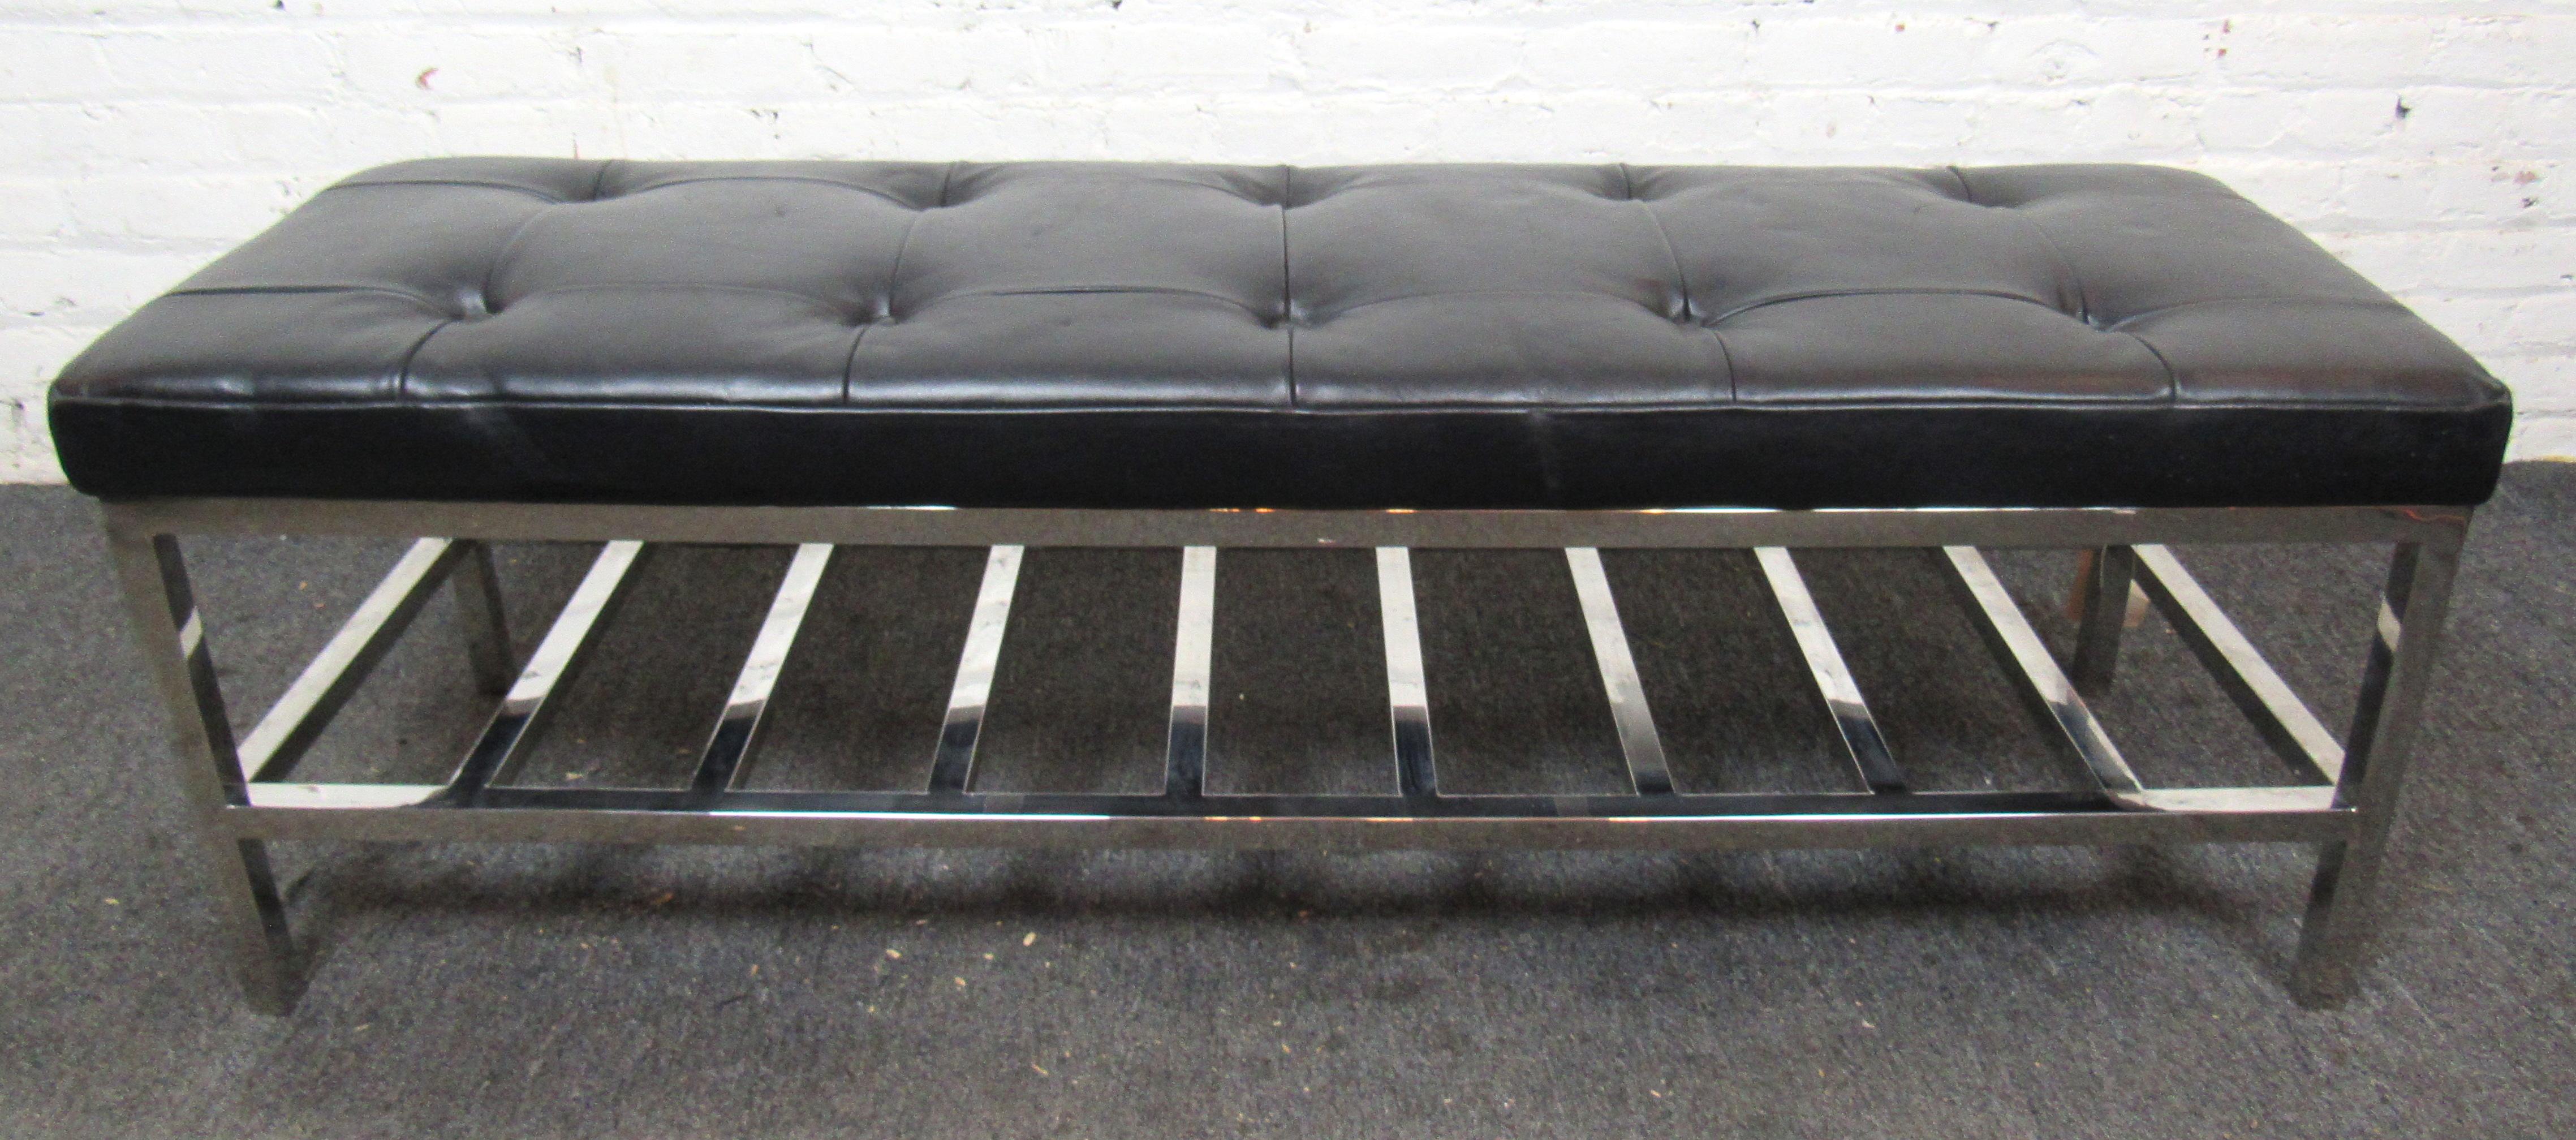 Vintage bench with sleek chrome frame and tufted cushioning. Great mid-century style for home use.

Please confirm location NY or NJ.